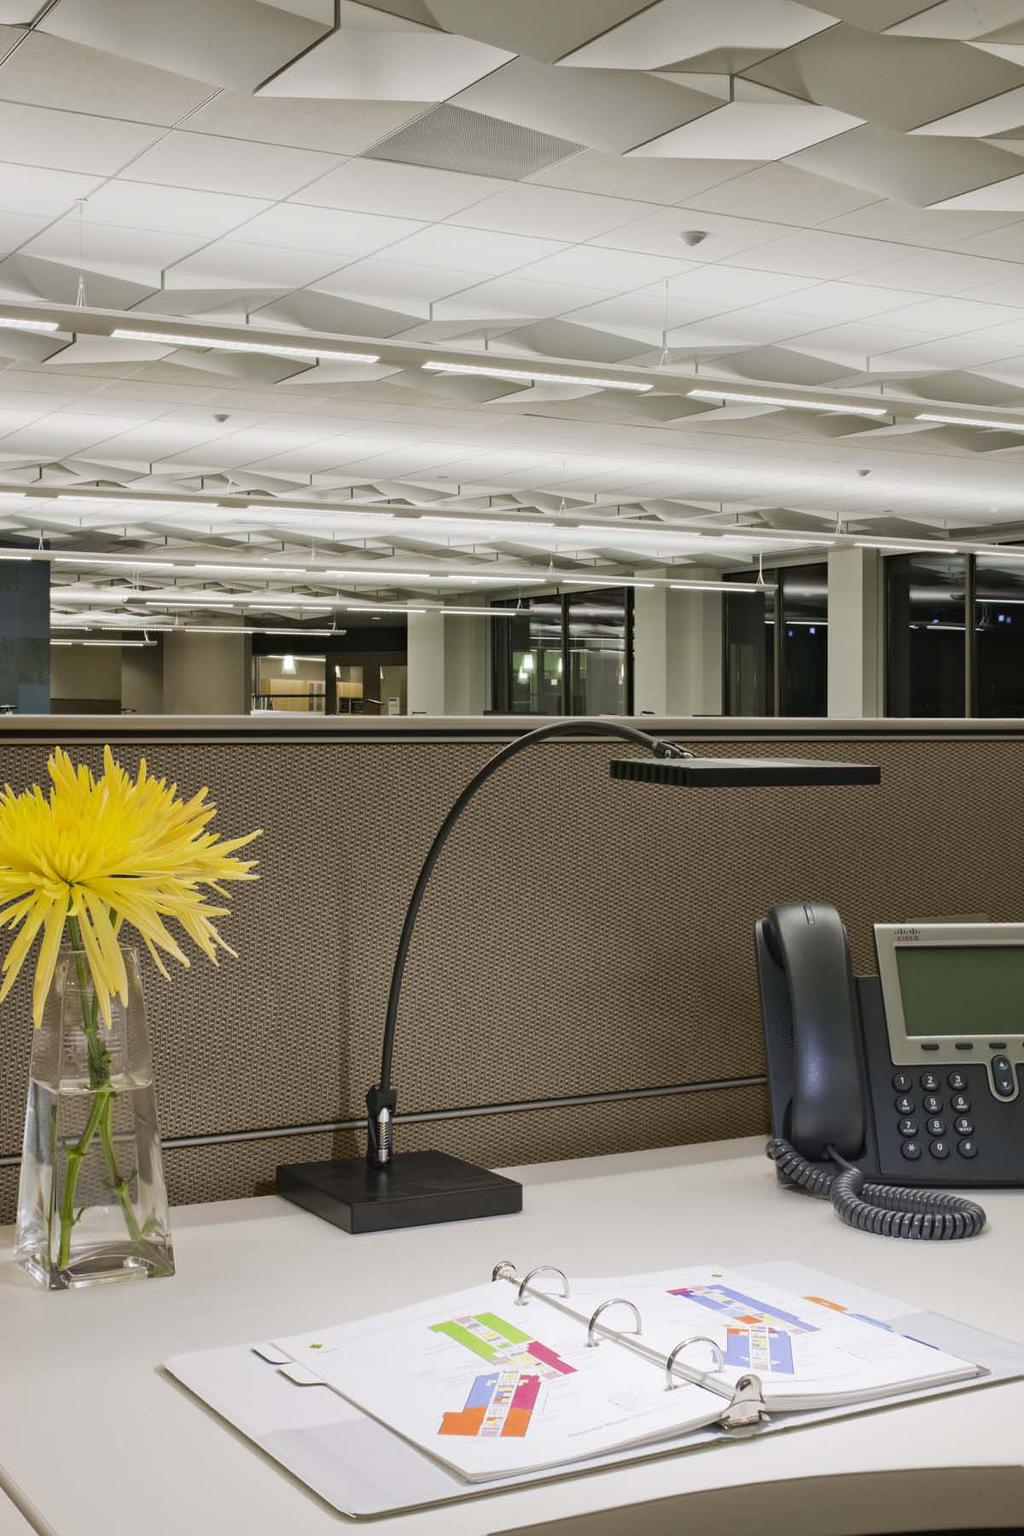 LEDs are perfect for task lighting New, LED task luminaires provide the right amount of light exactly where you need it Old,